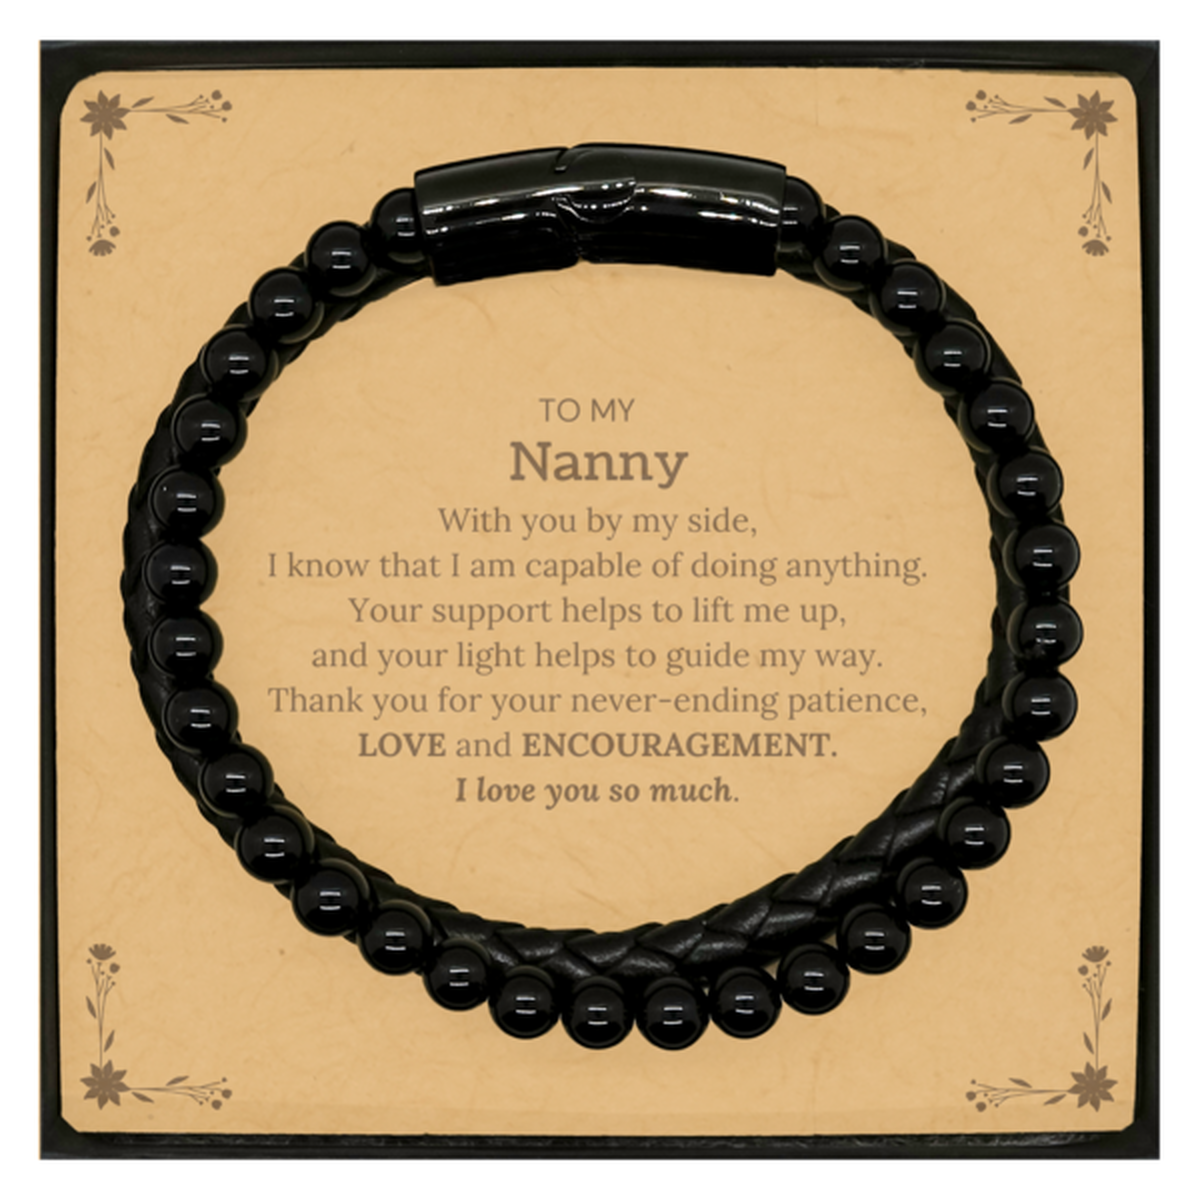 Appreciation Nanny Stone Leather Bracelets Gifts, To My Nanny Birthday Christmas Wedding Keepsake Gifts for Nanny With you by my side, I know that I am capable of doing anything. I love you so much